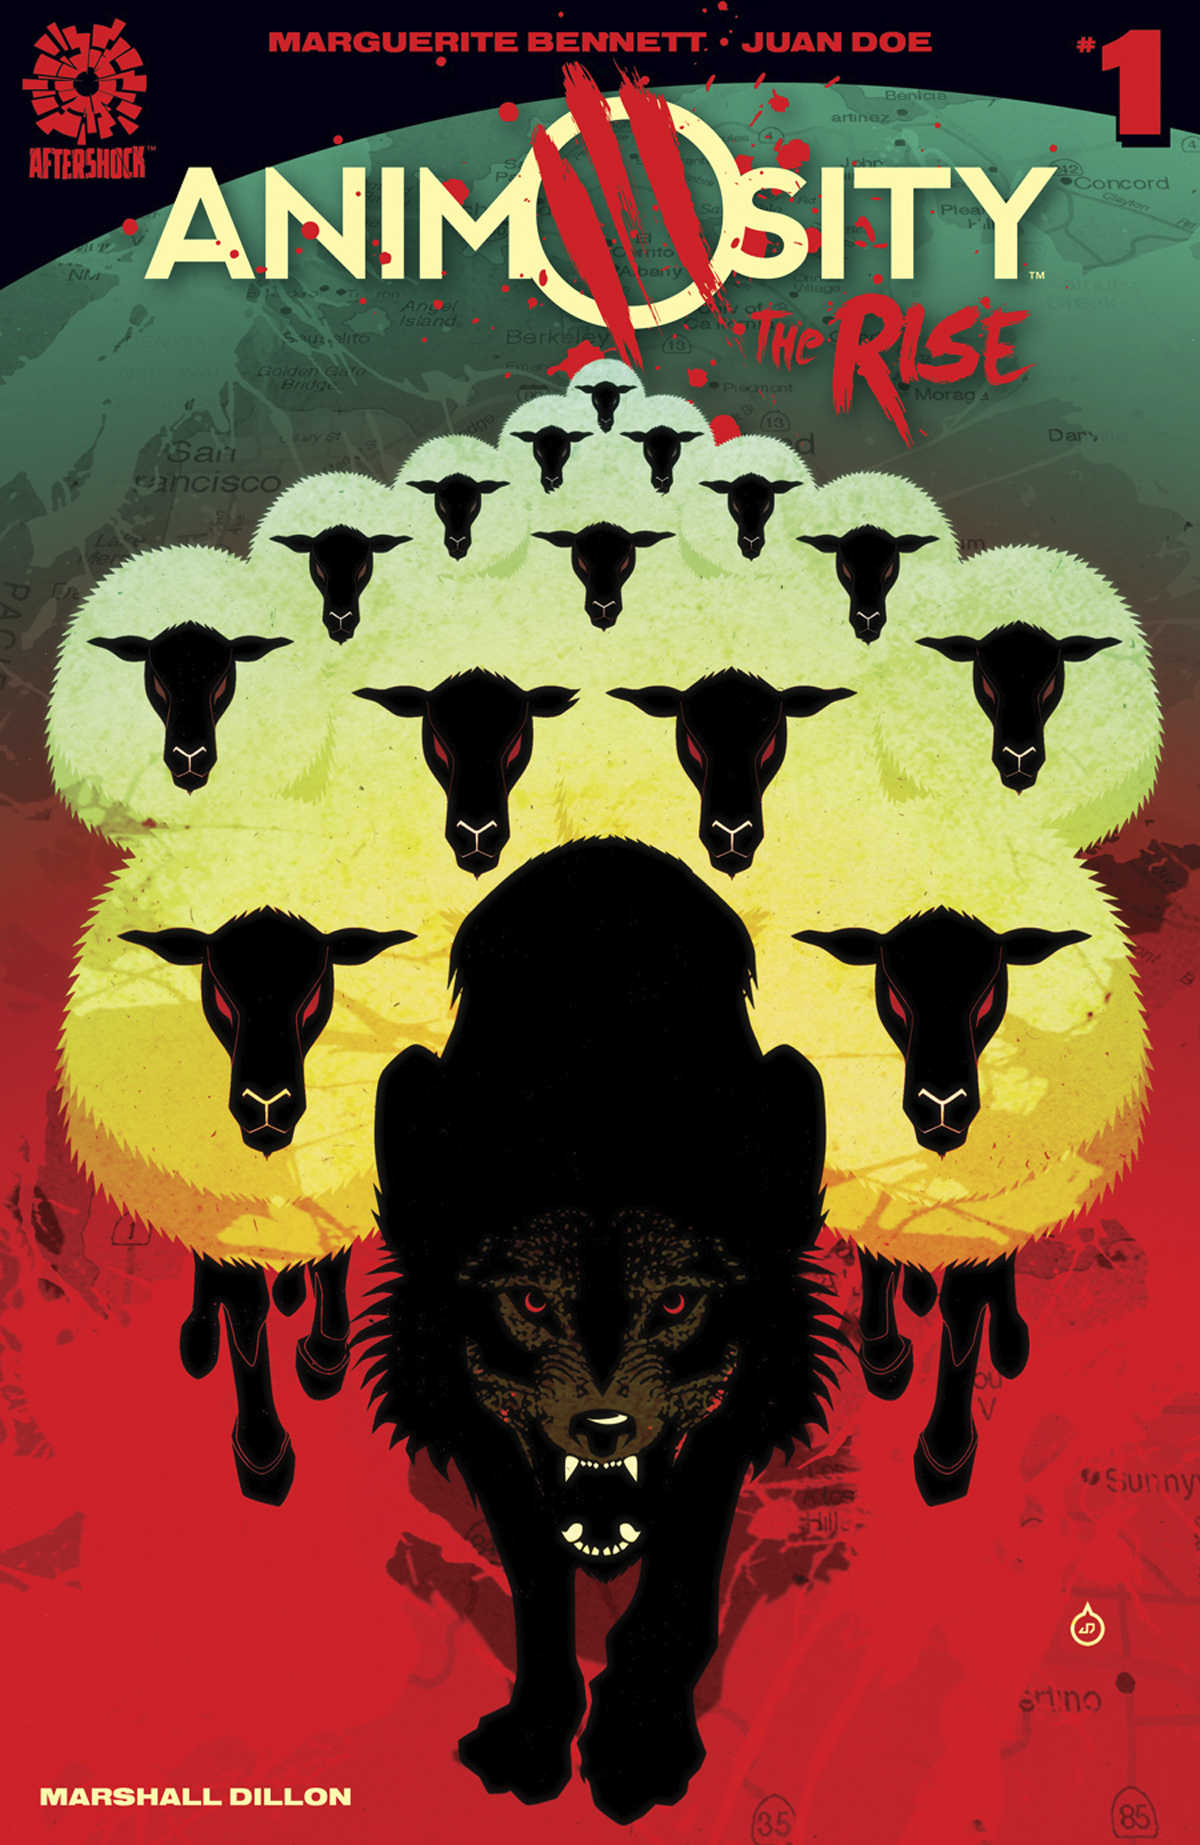 ANIMOSITY THE RISE #1 (OF 3)